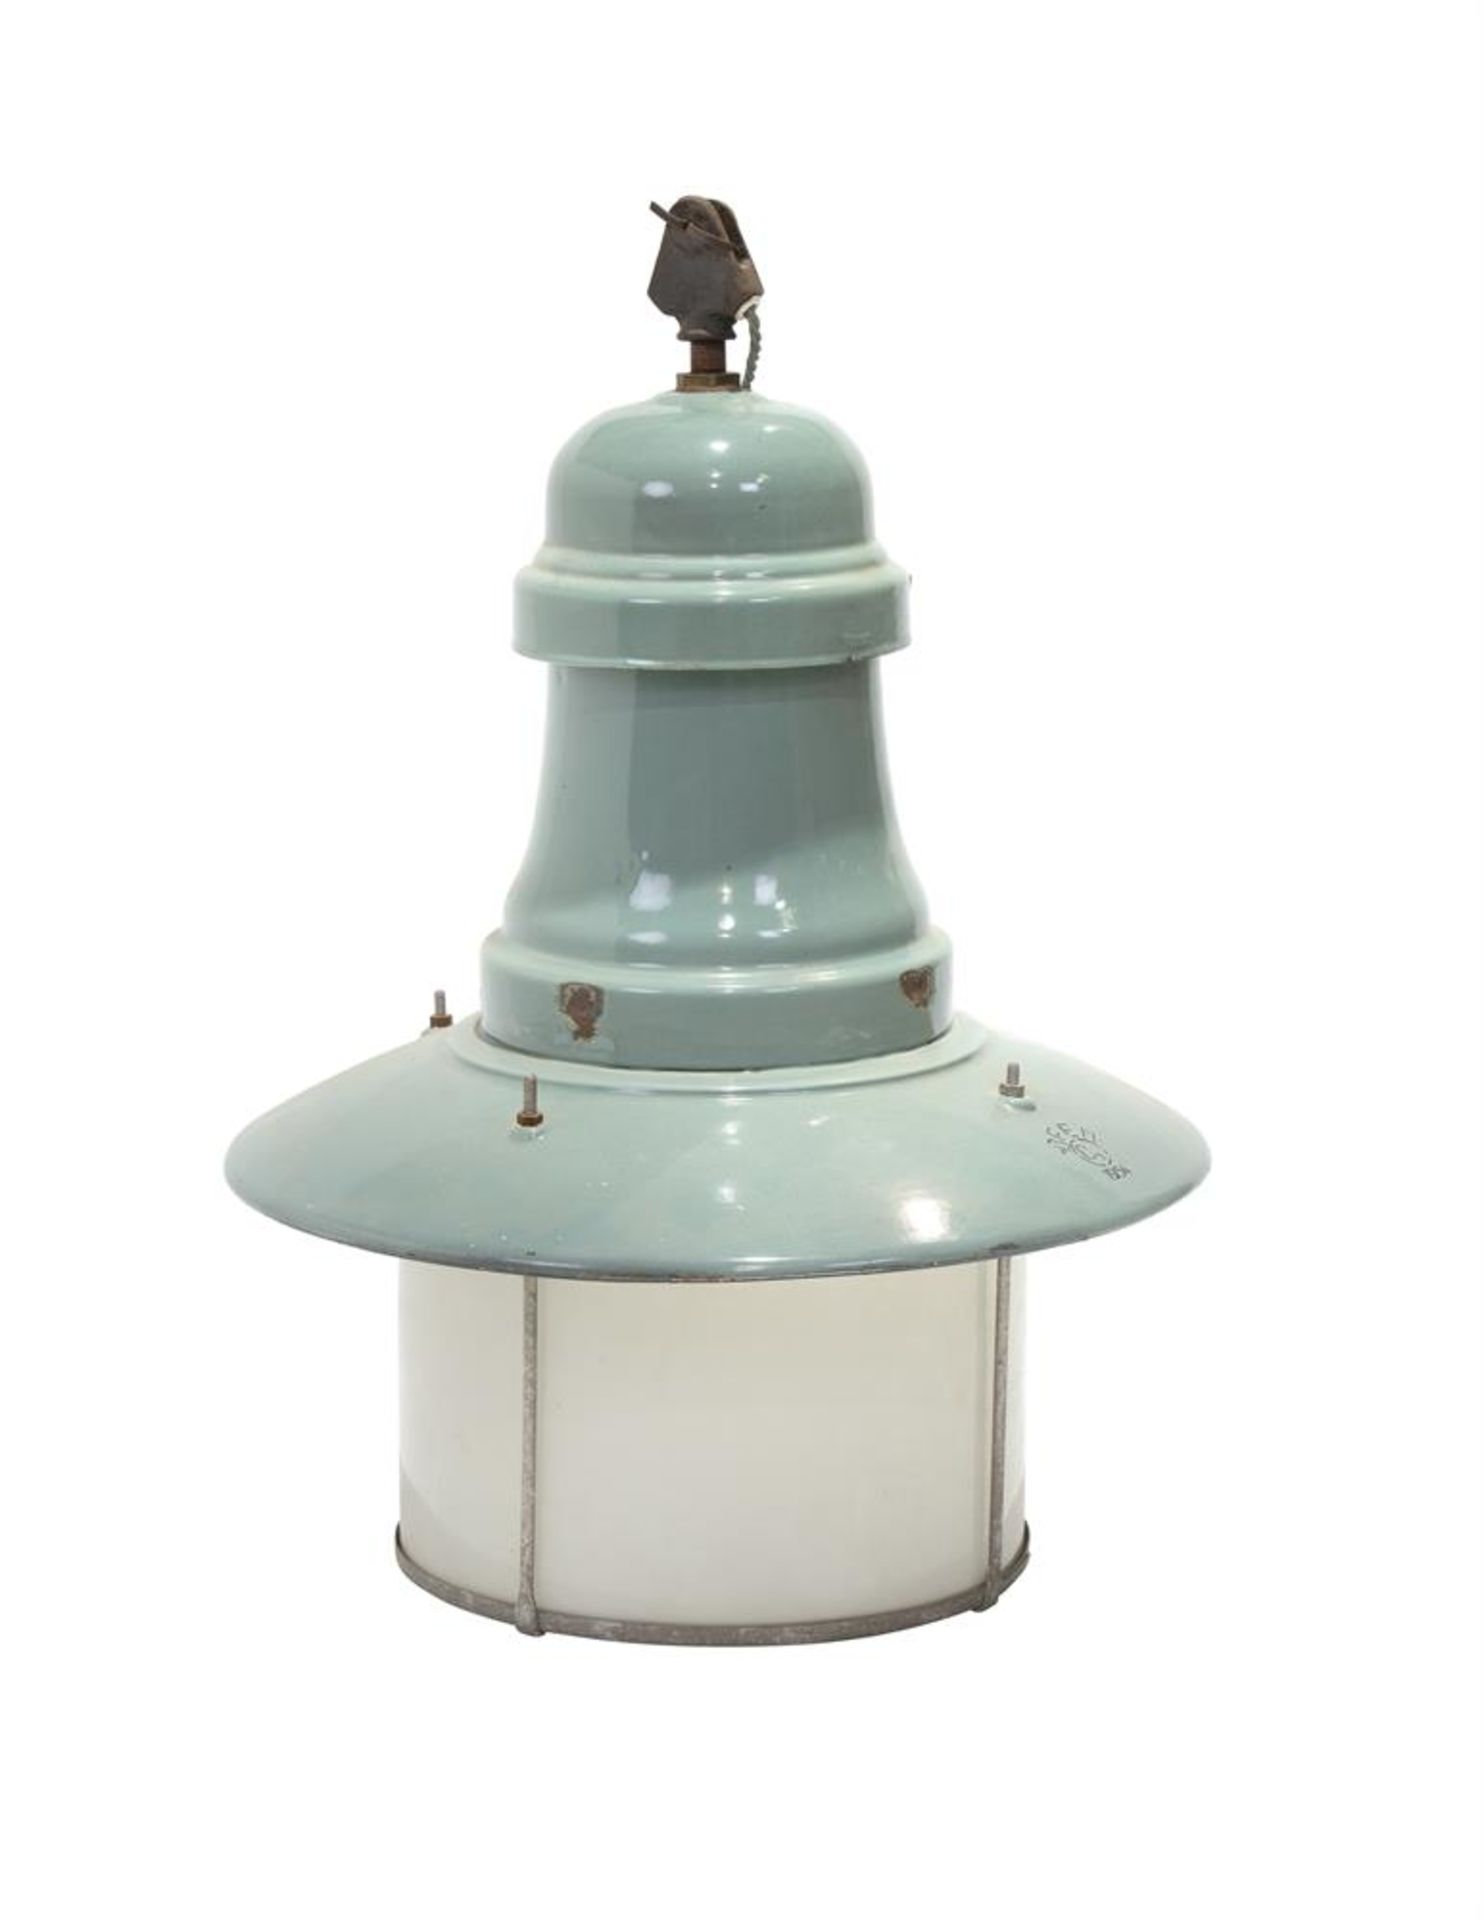 A SET OF SIX INDUSTRIAL ENAMEL PENDANT LIGHTS, HUNGARY, DATED 1954 AND STAMPED BFEM, B1 - Image 2 of 5